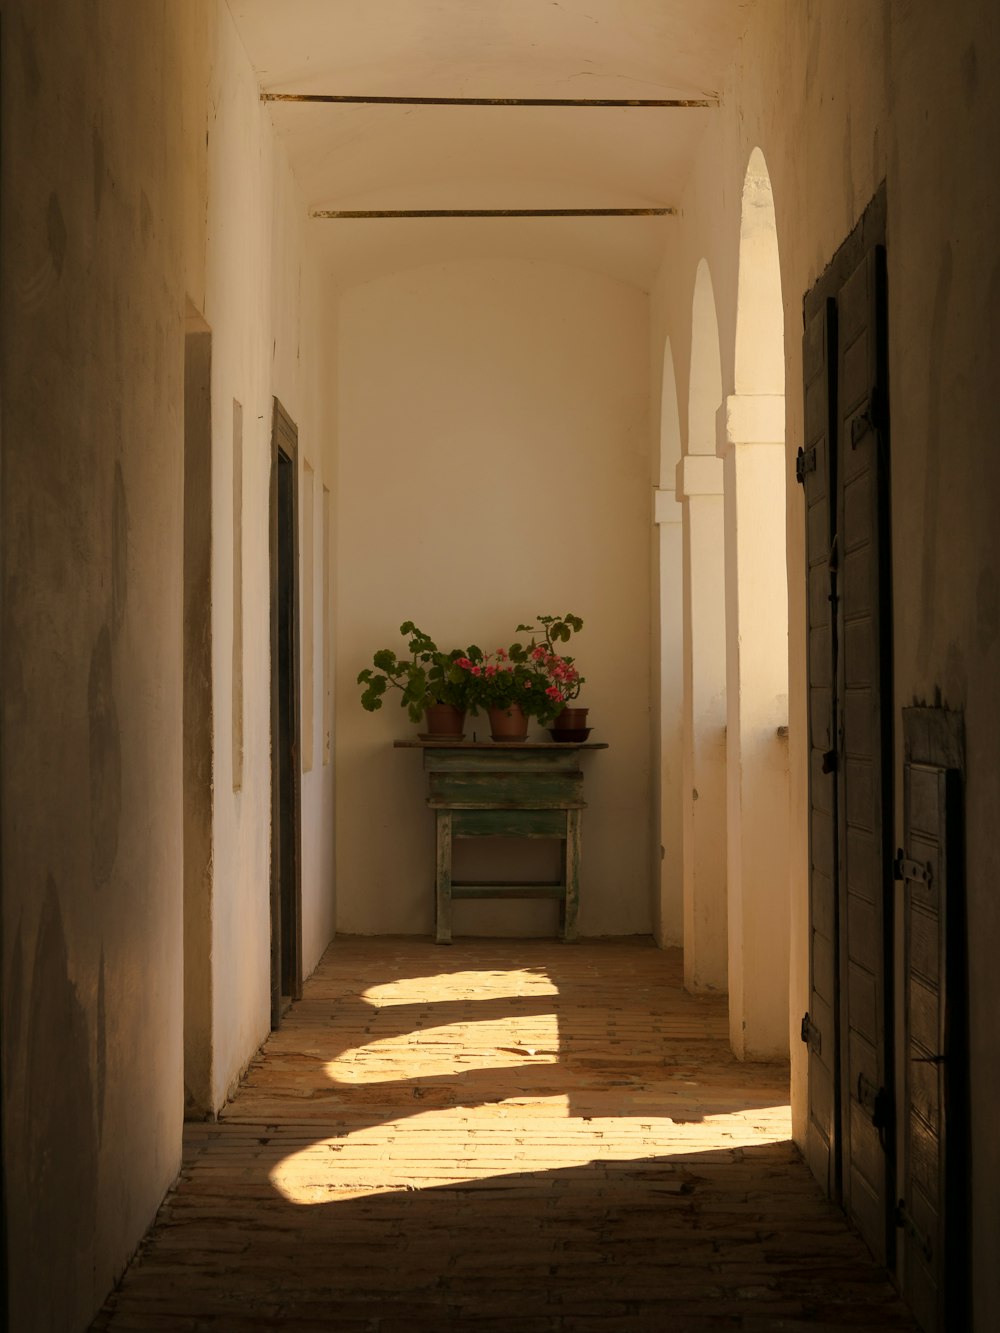 a hallway with a bench and potted plants